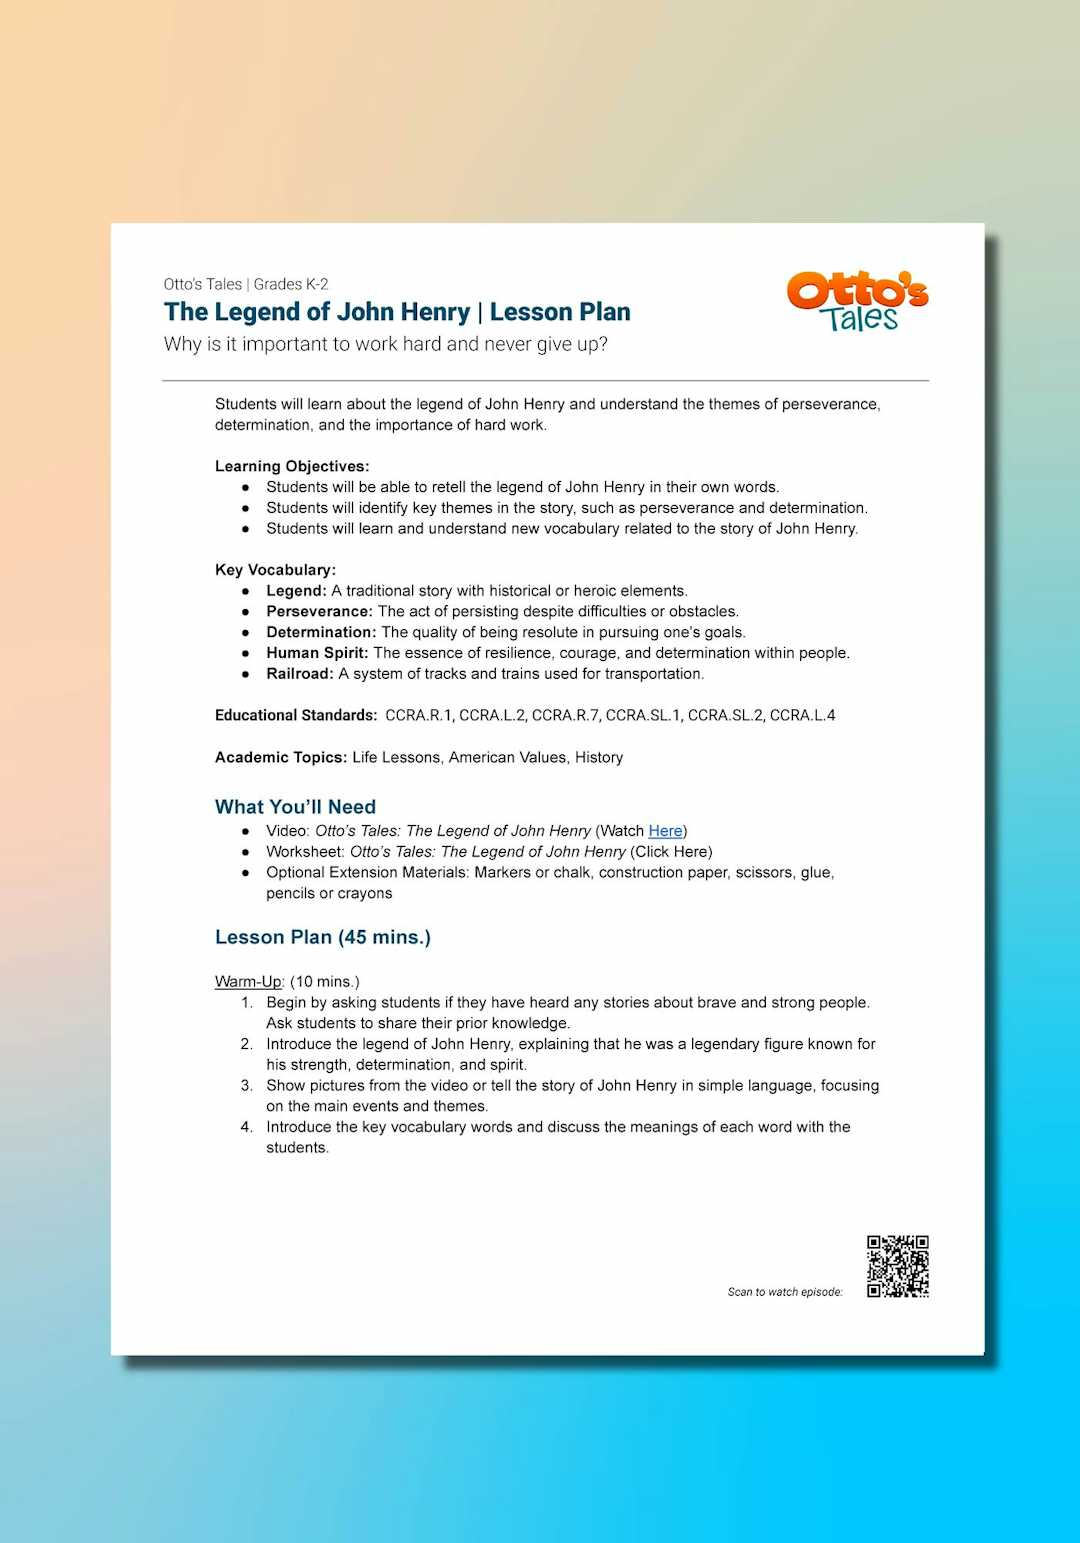 "Otto's Tales: The Legend of John Henry" Lesson Plan